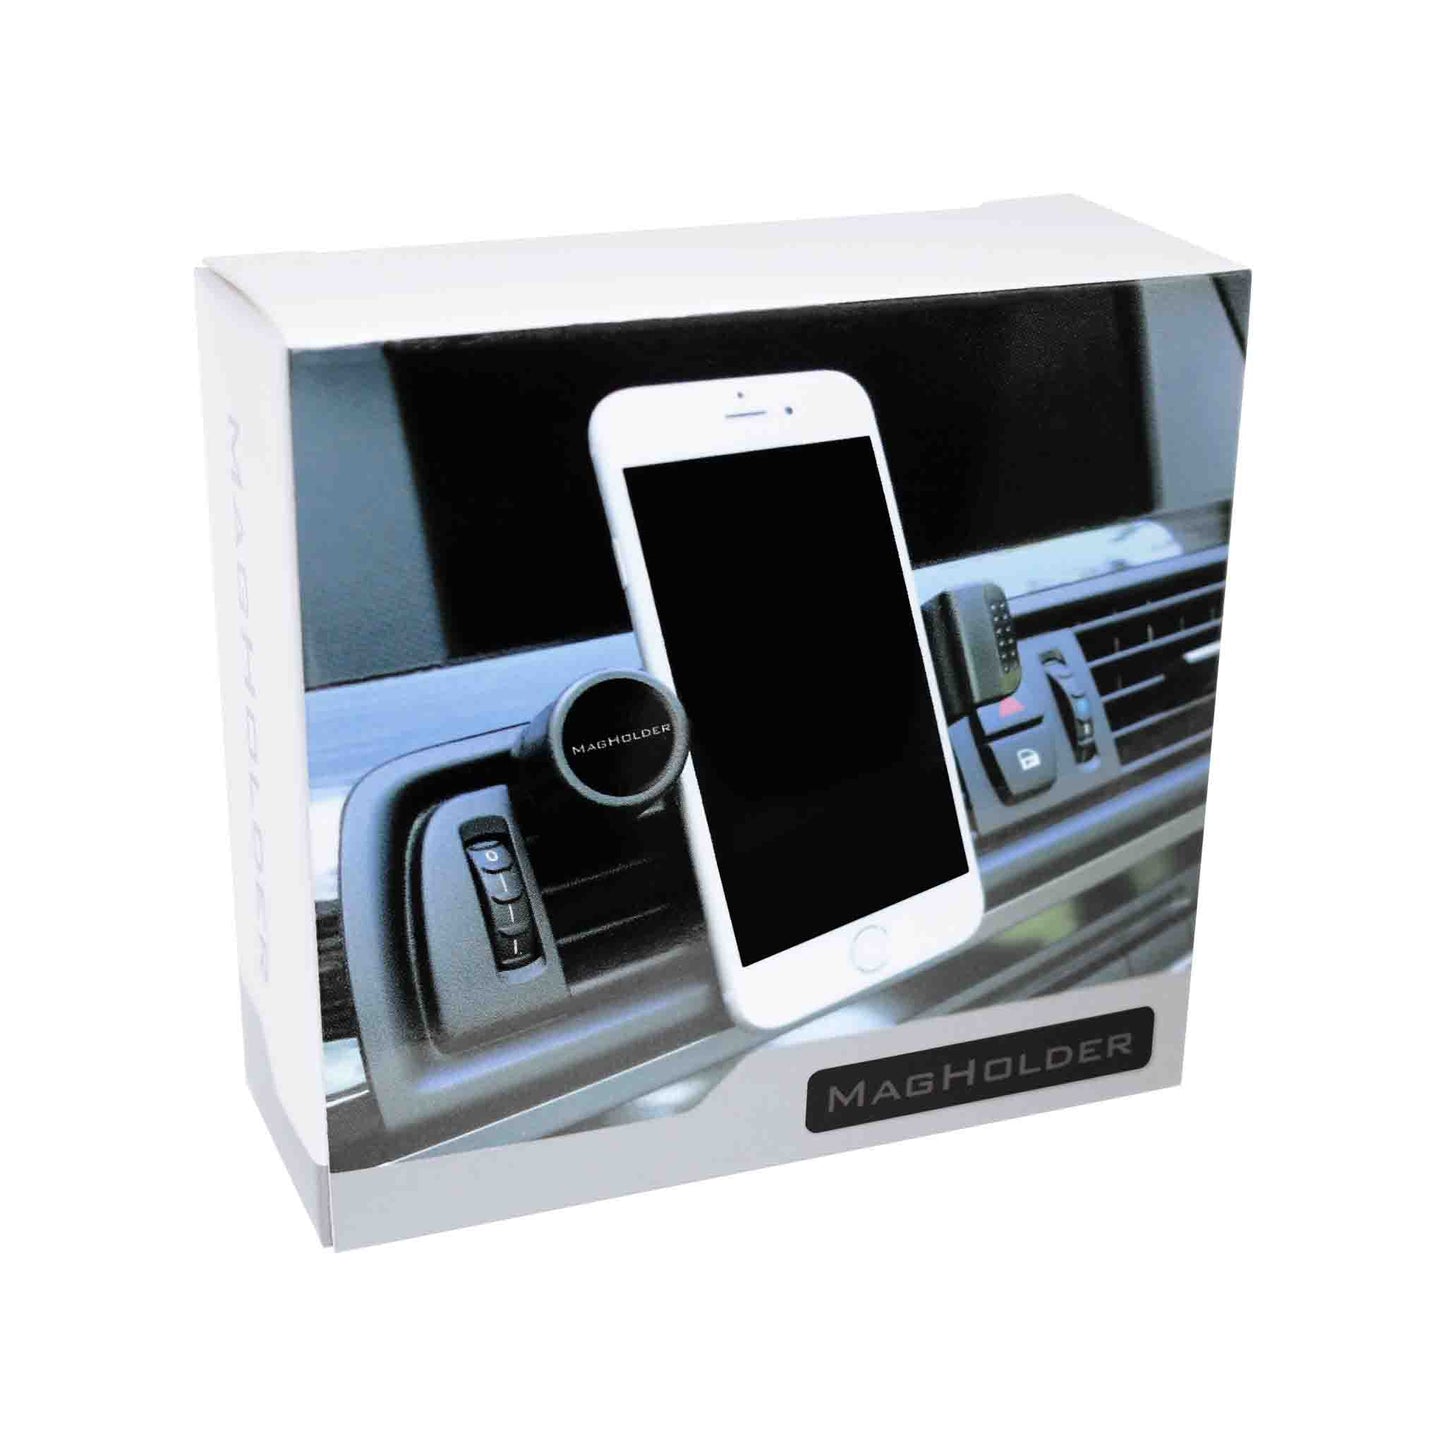 MagHolder "classic" car cell phone holder